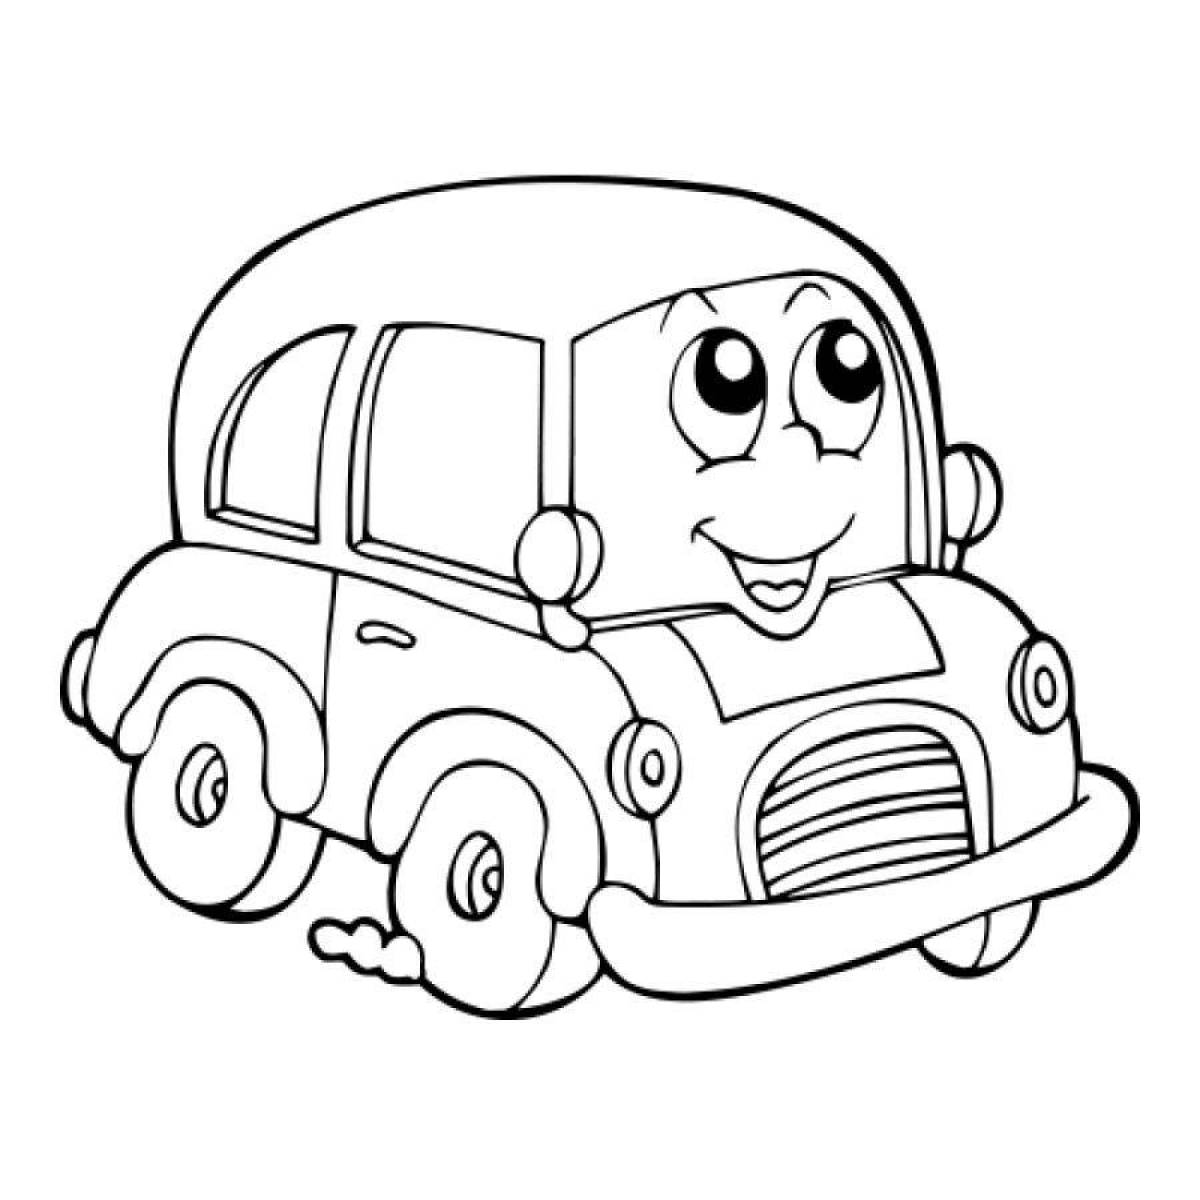 Finley outstanding fire truck coloring page